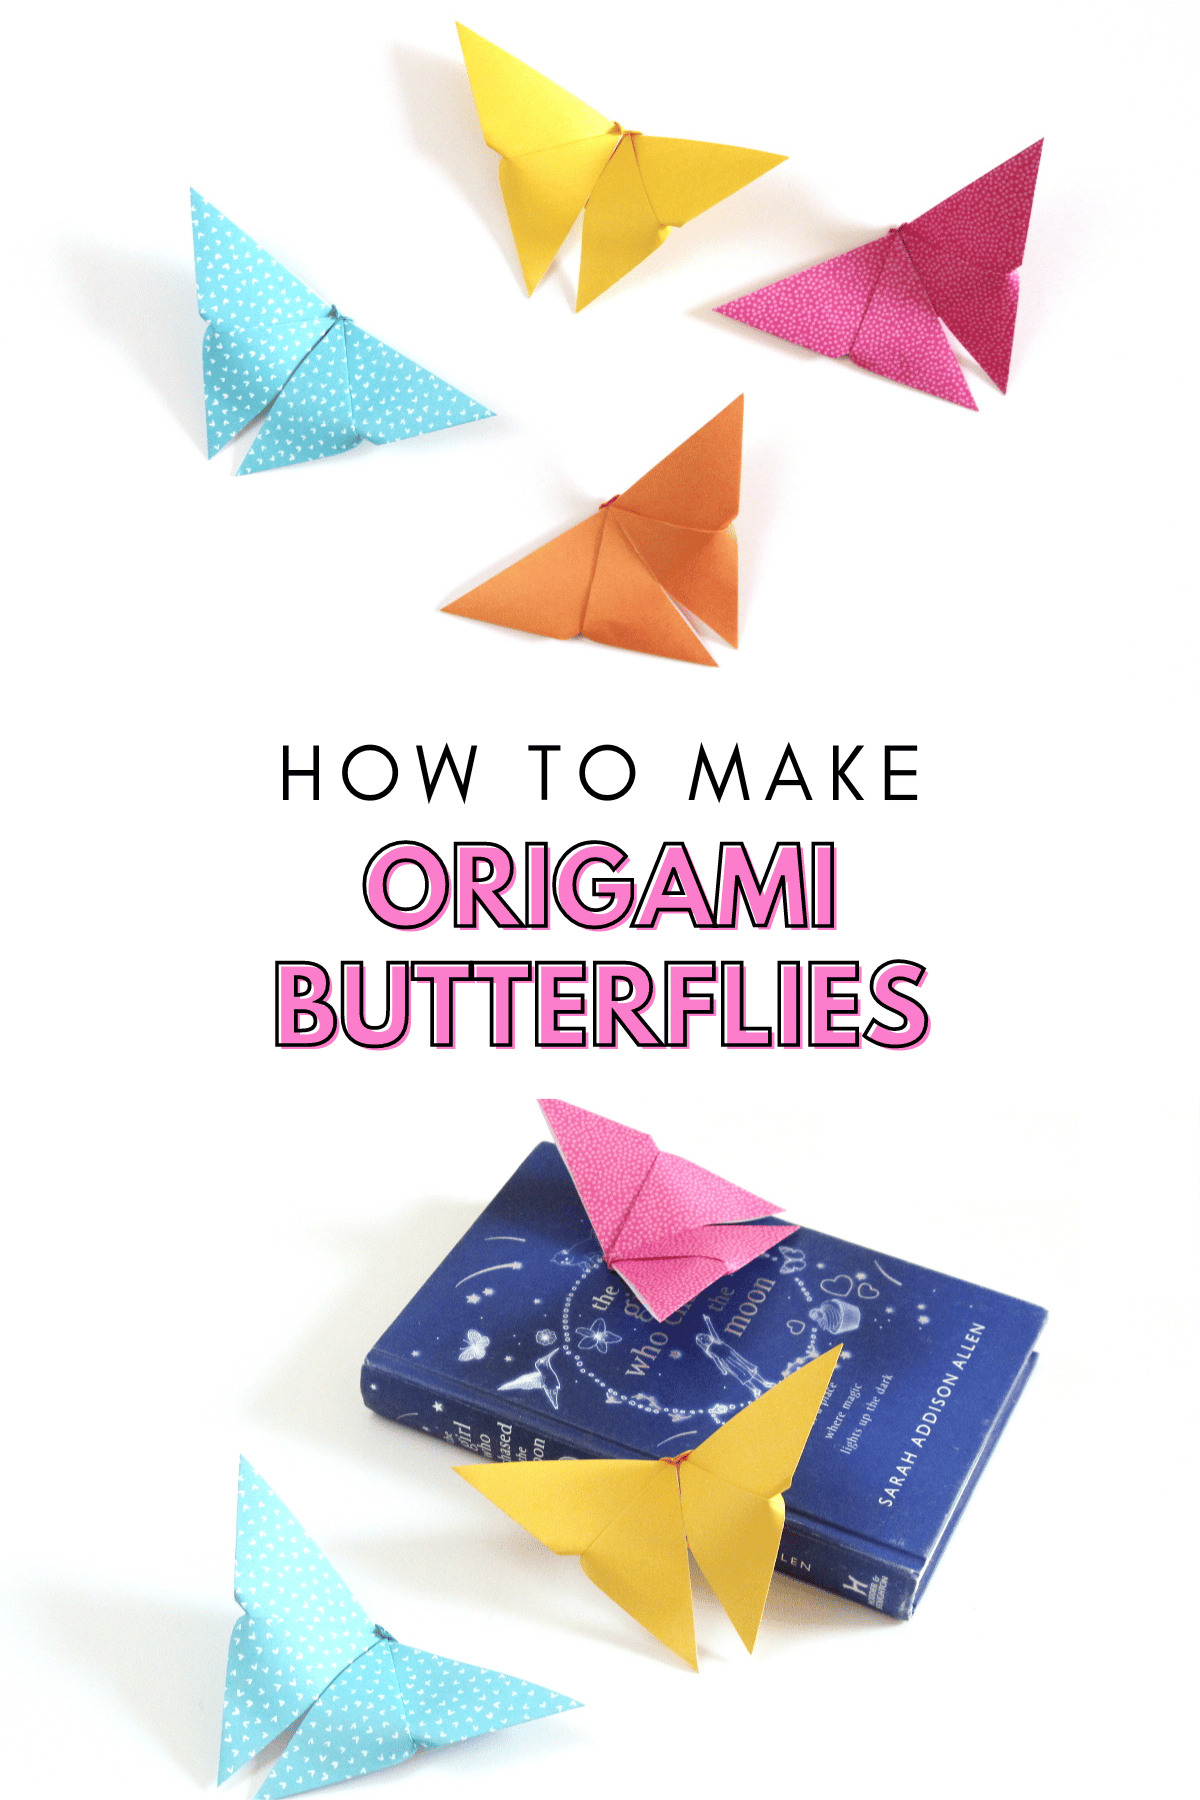 How To Make Paper Magnet At Home [Easy Origami] 